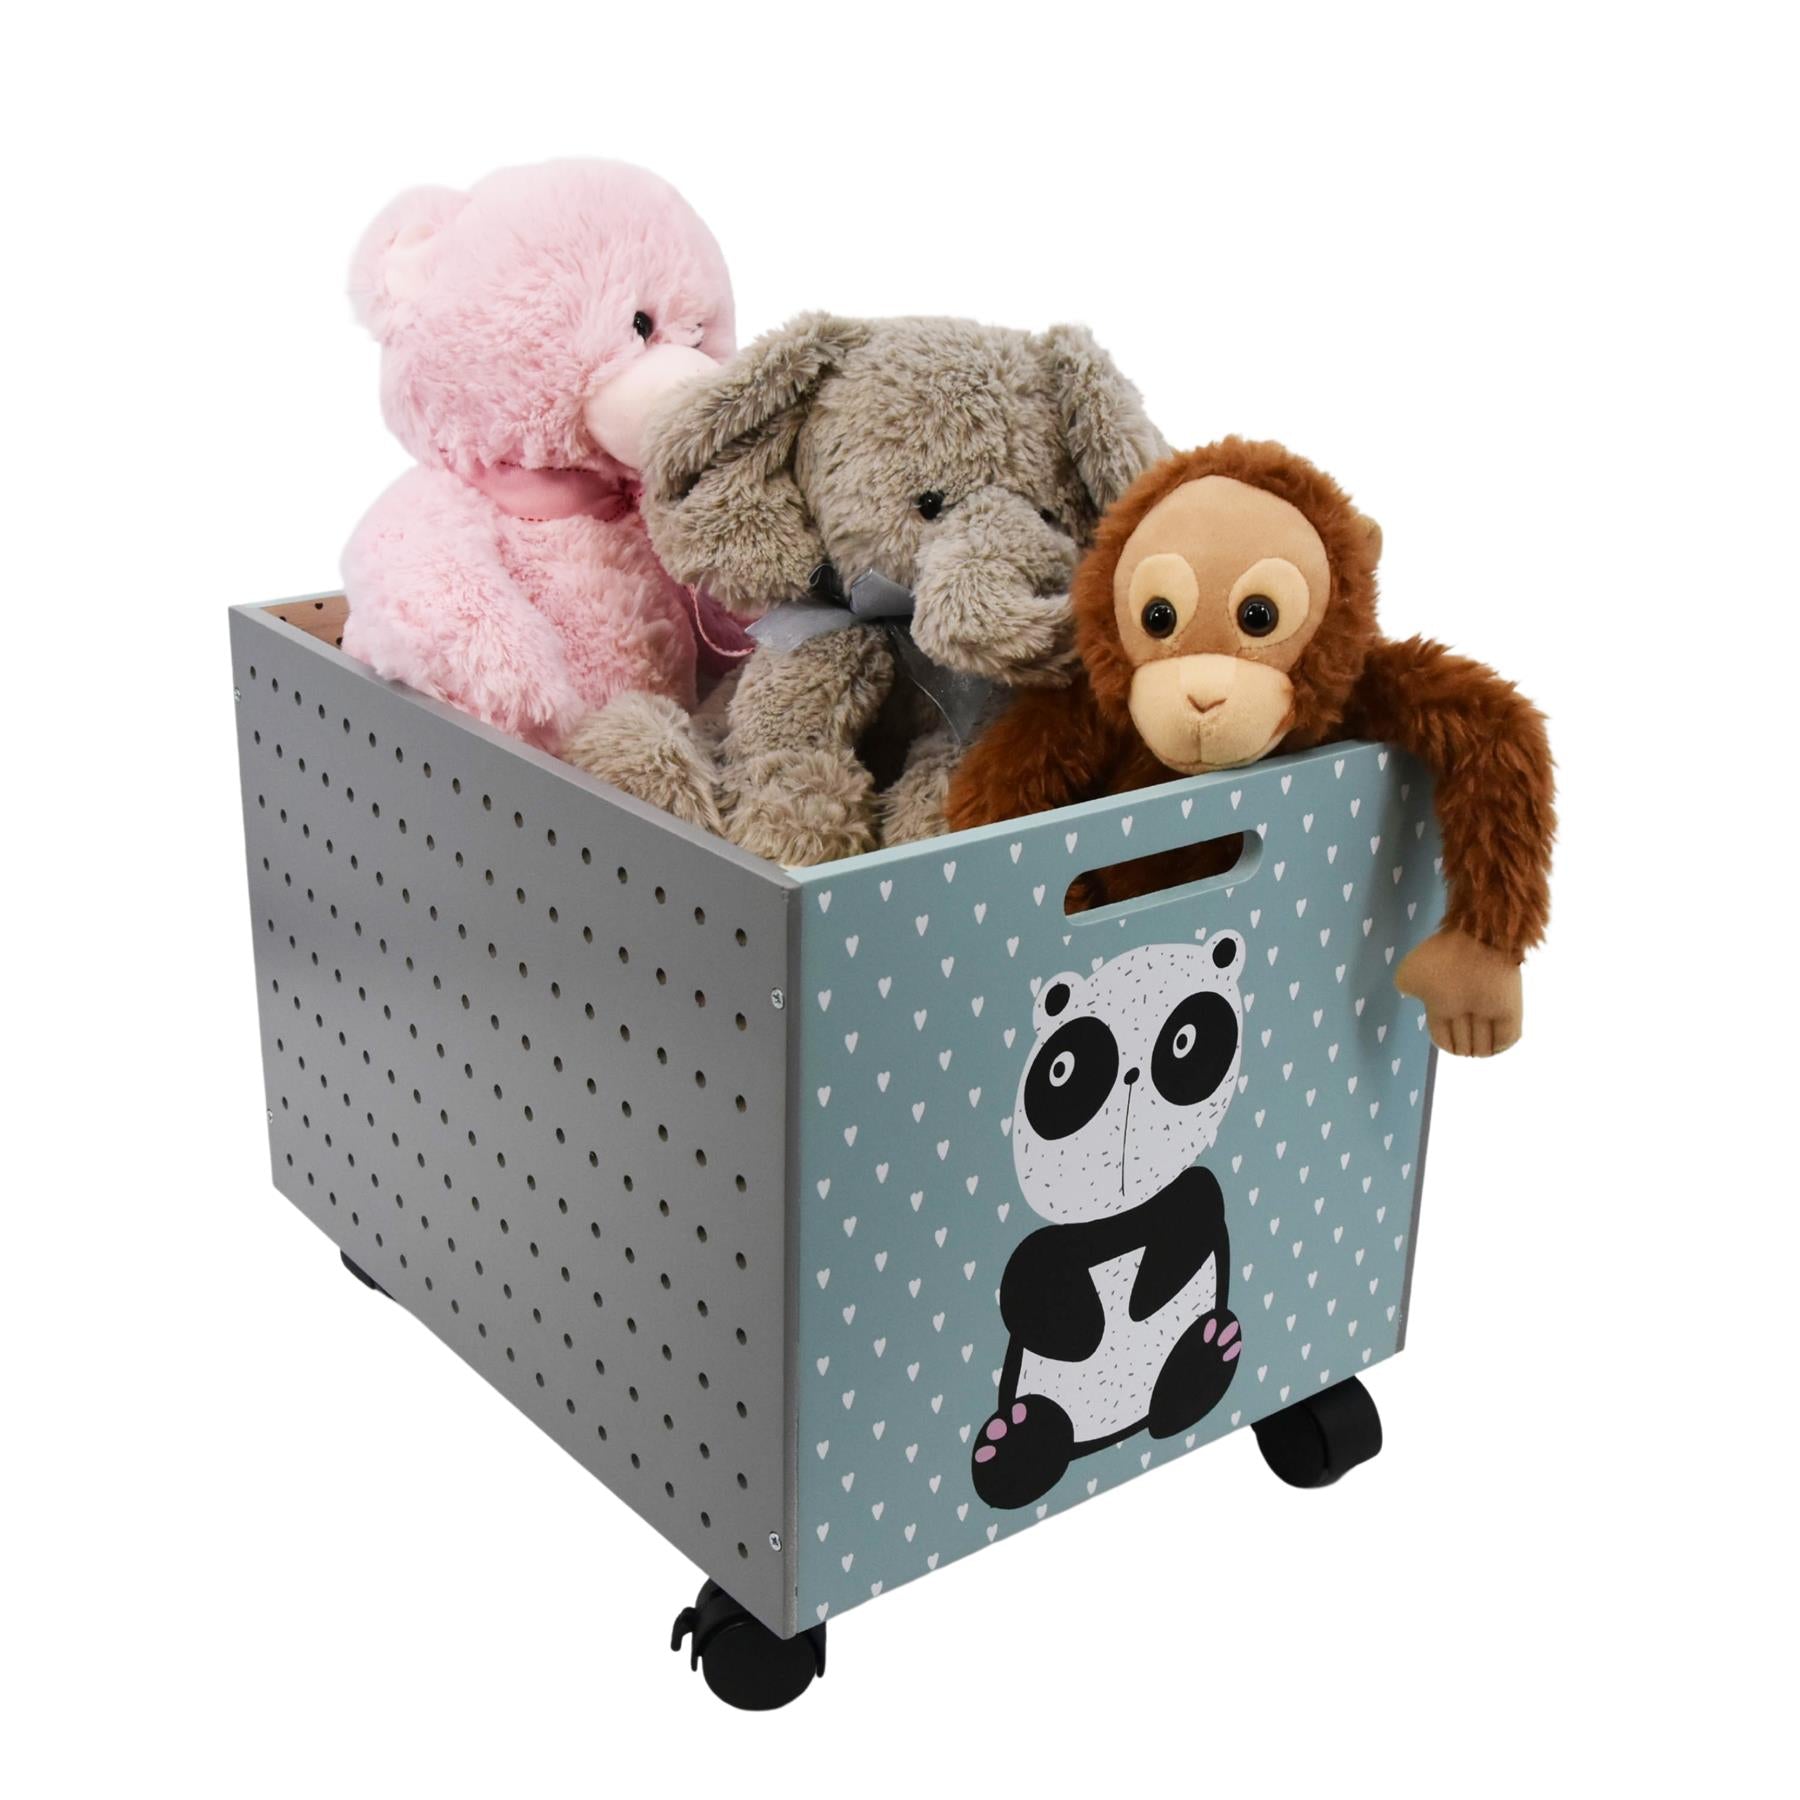 Panda Design Kids Wooden Storage Chest On Wheels by The Magic Toy Shop - UKBuyZone